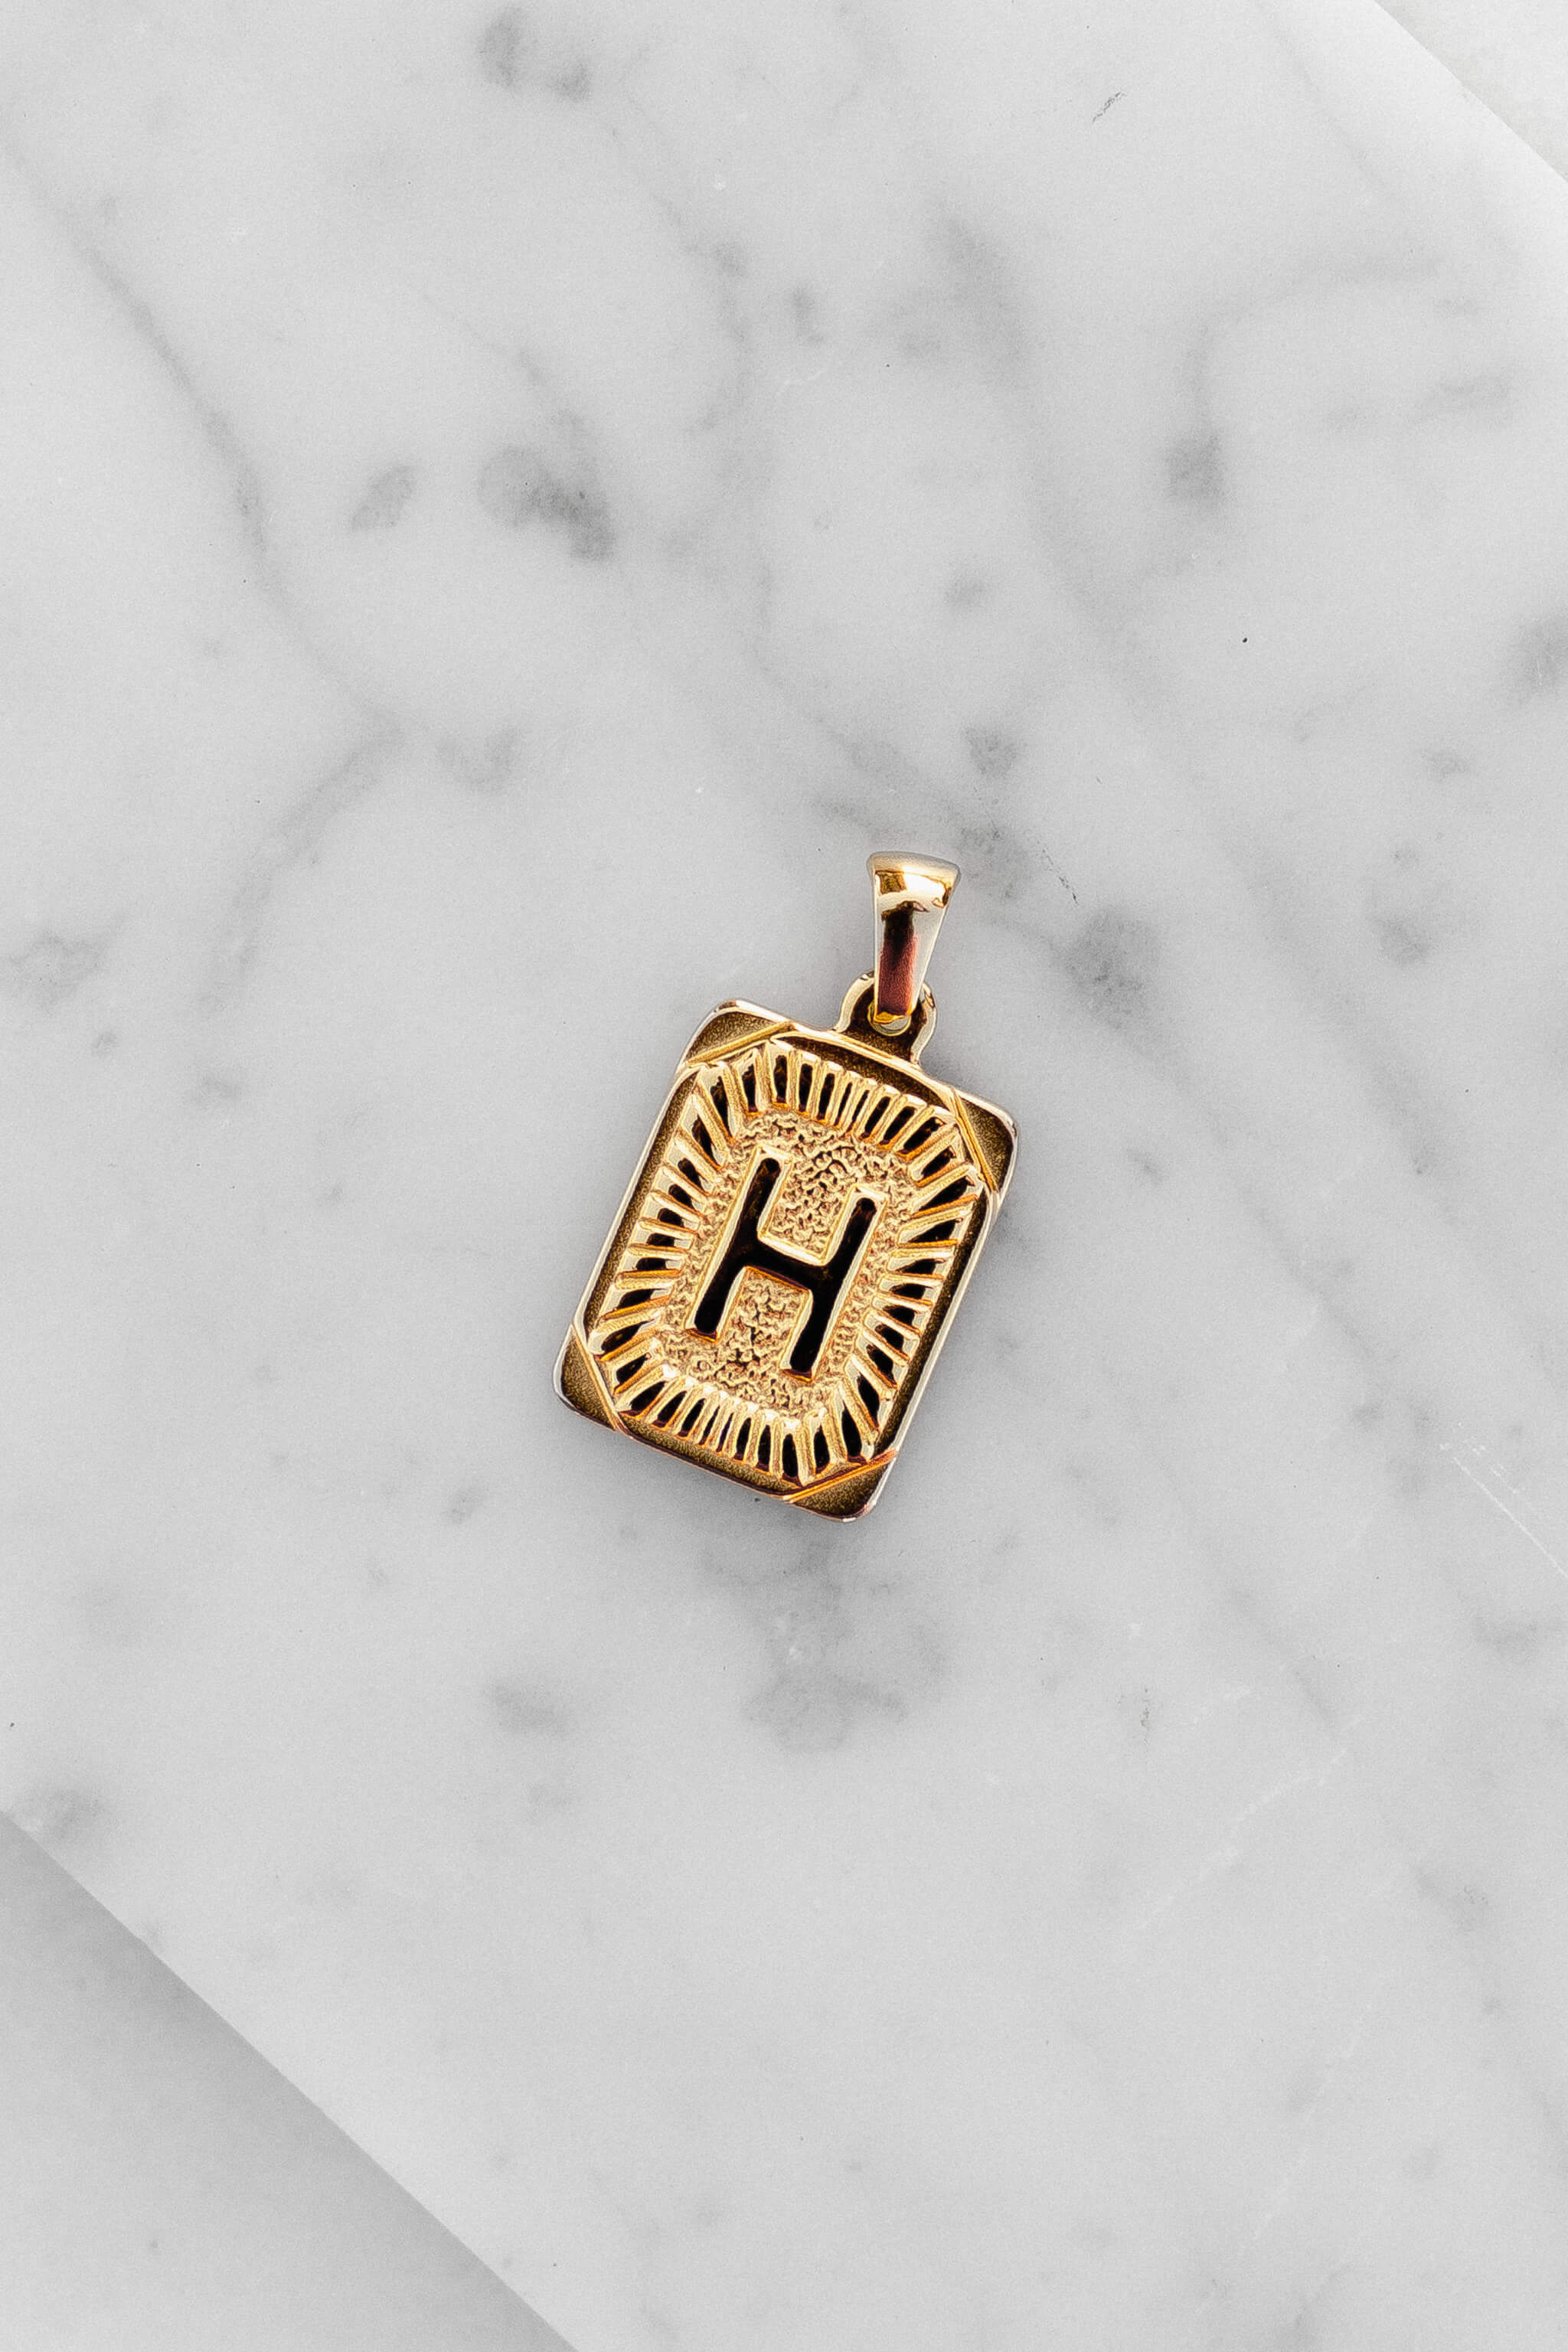 Gold Monogram Letter "H" Charm laying on a marble